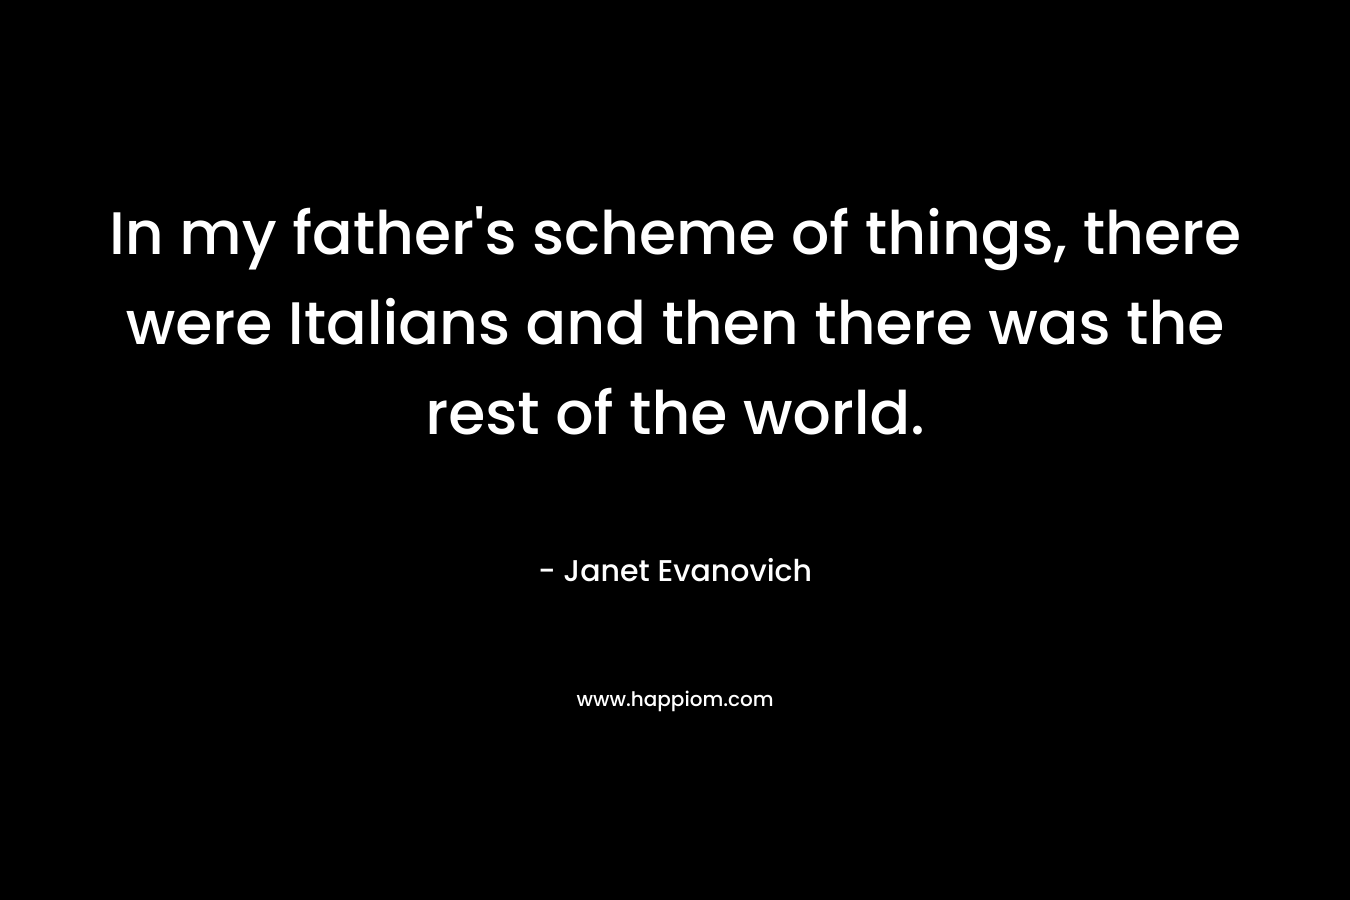 In my father's scheme of things, there were Italians and then there was the rest of the world.